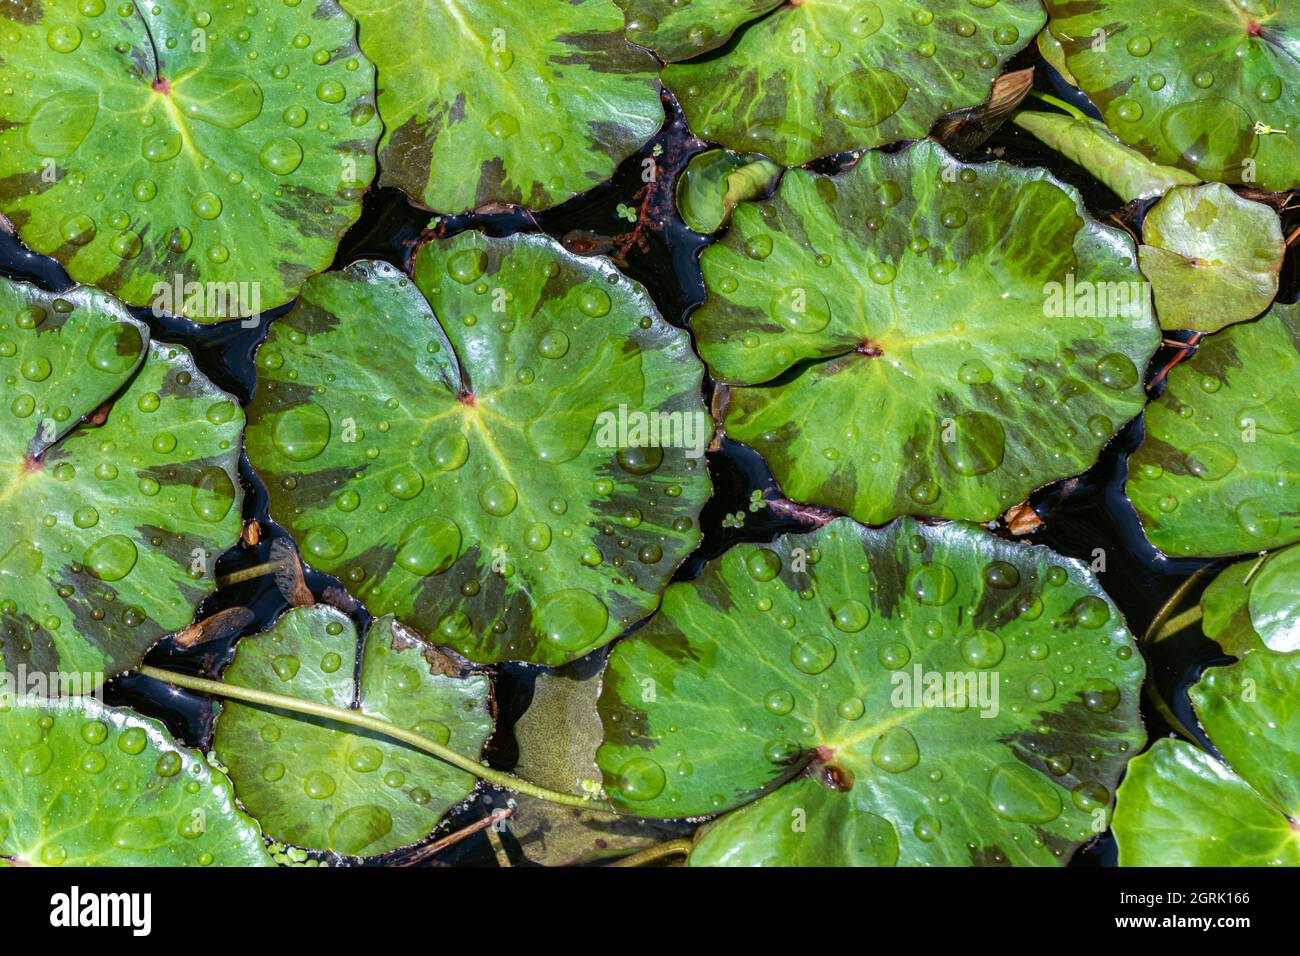 Closeup of lily pads, floating in pond. Covered in raindrops. Missouri Botanical Garden, St. Louis, Missouri, USA. Stock Photo